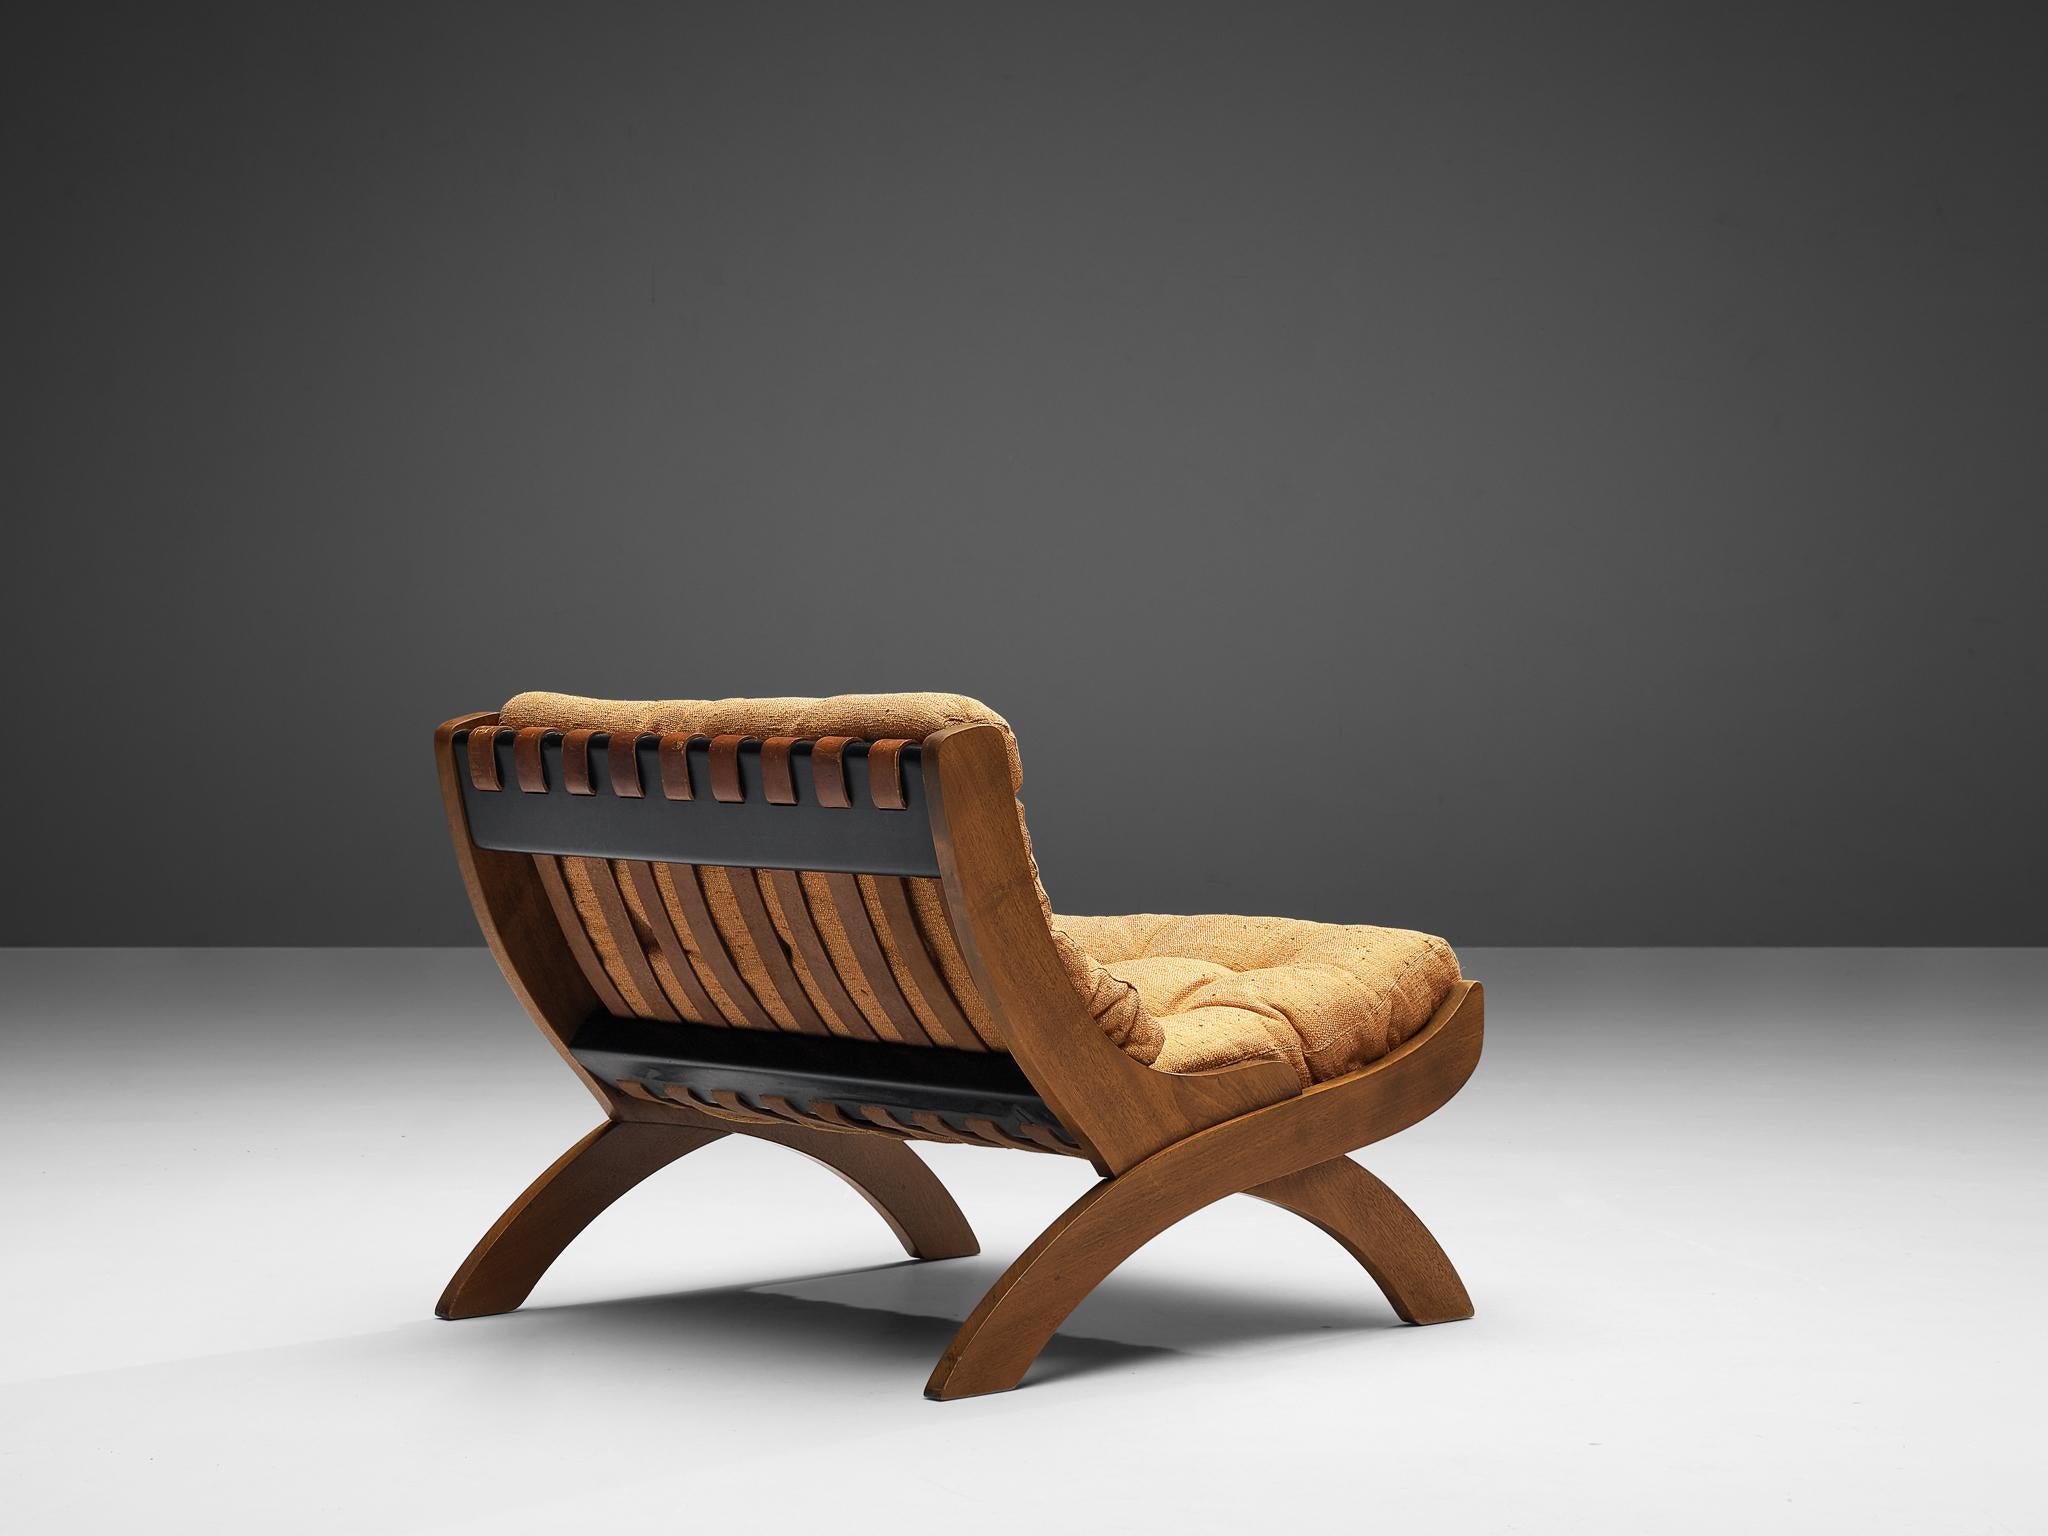 Marco Comolli for ICF, lounge chair, model ‘CP1’, walnut, light orange fabric, leather, Italy, 1965

This lounge chair by Marco Comolli presents an exquisite fusion of materials. The cognac leather straps composing the back are responsible for